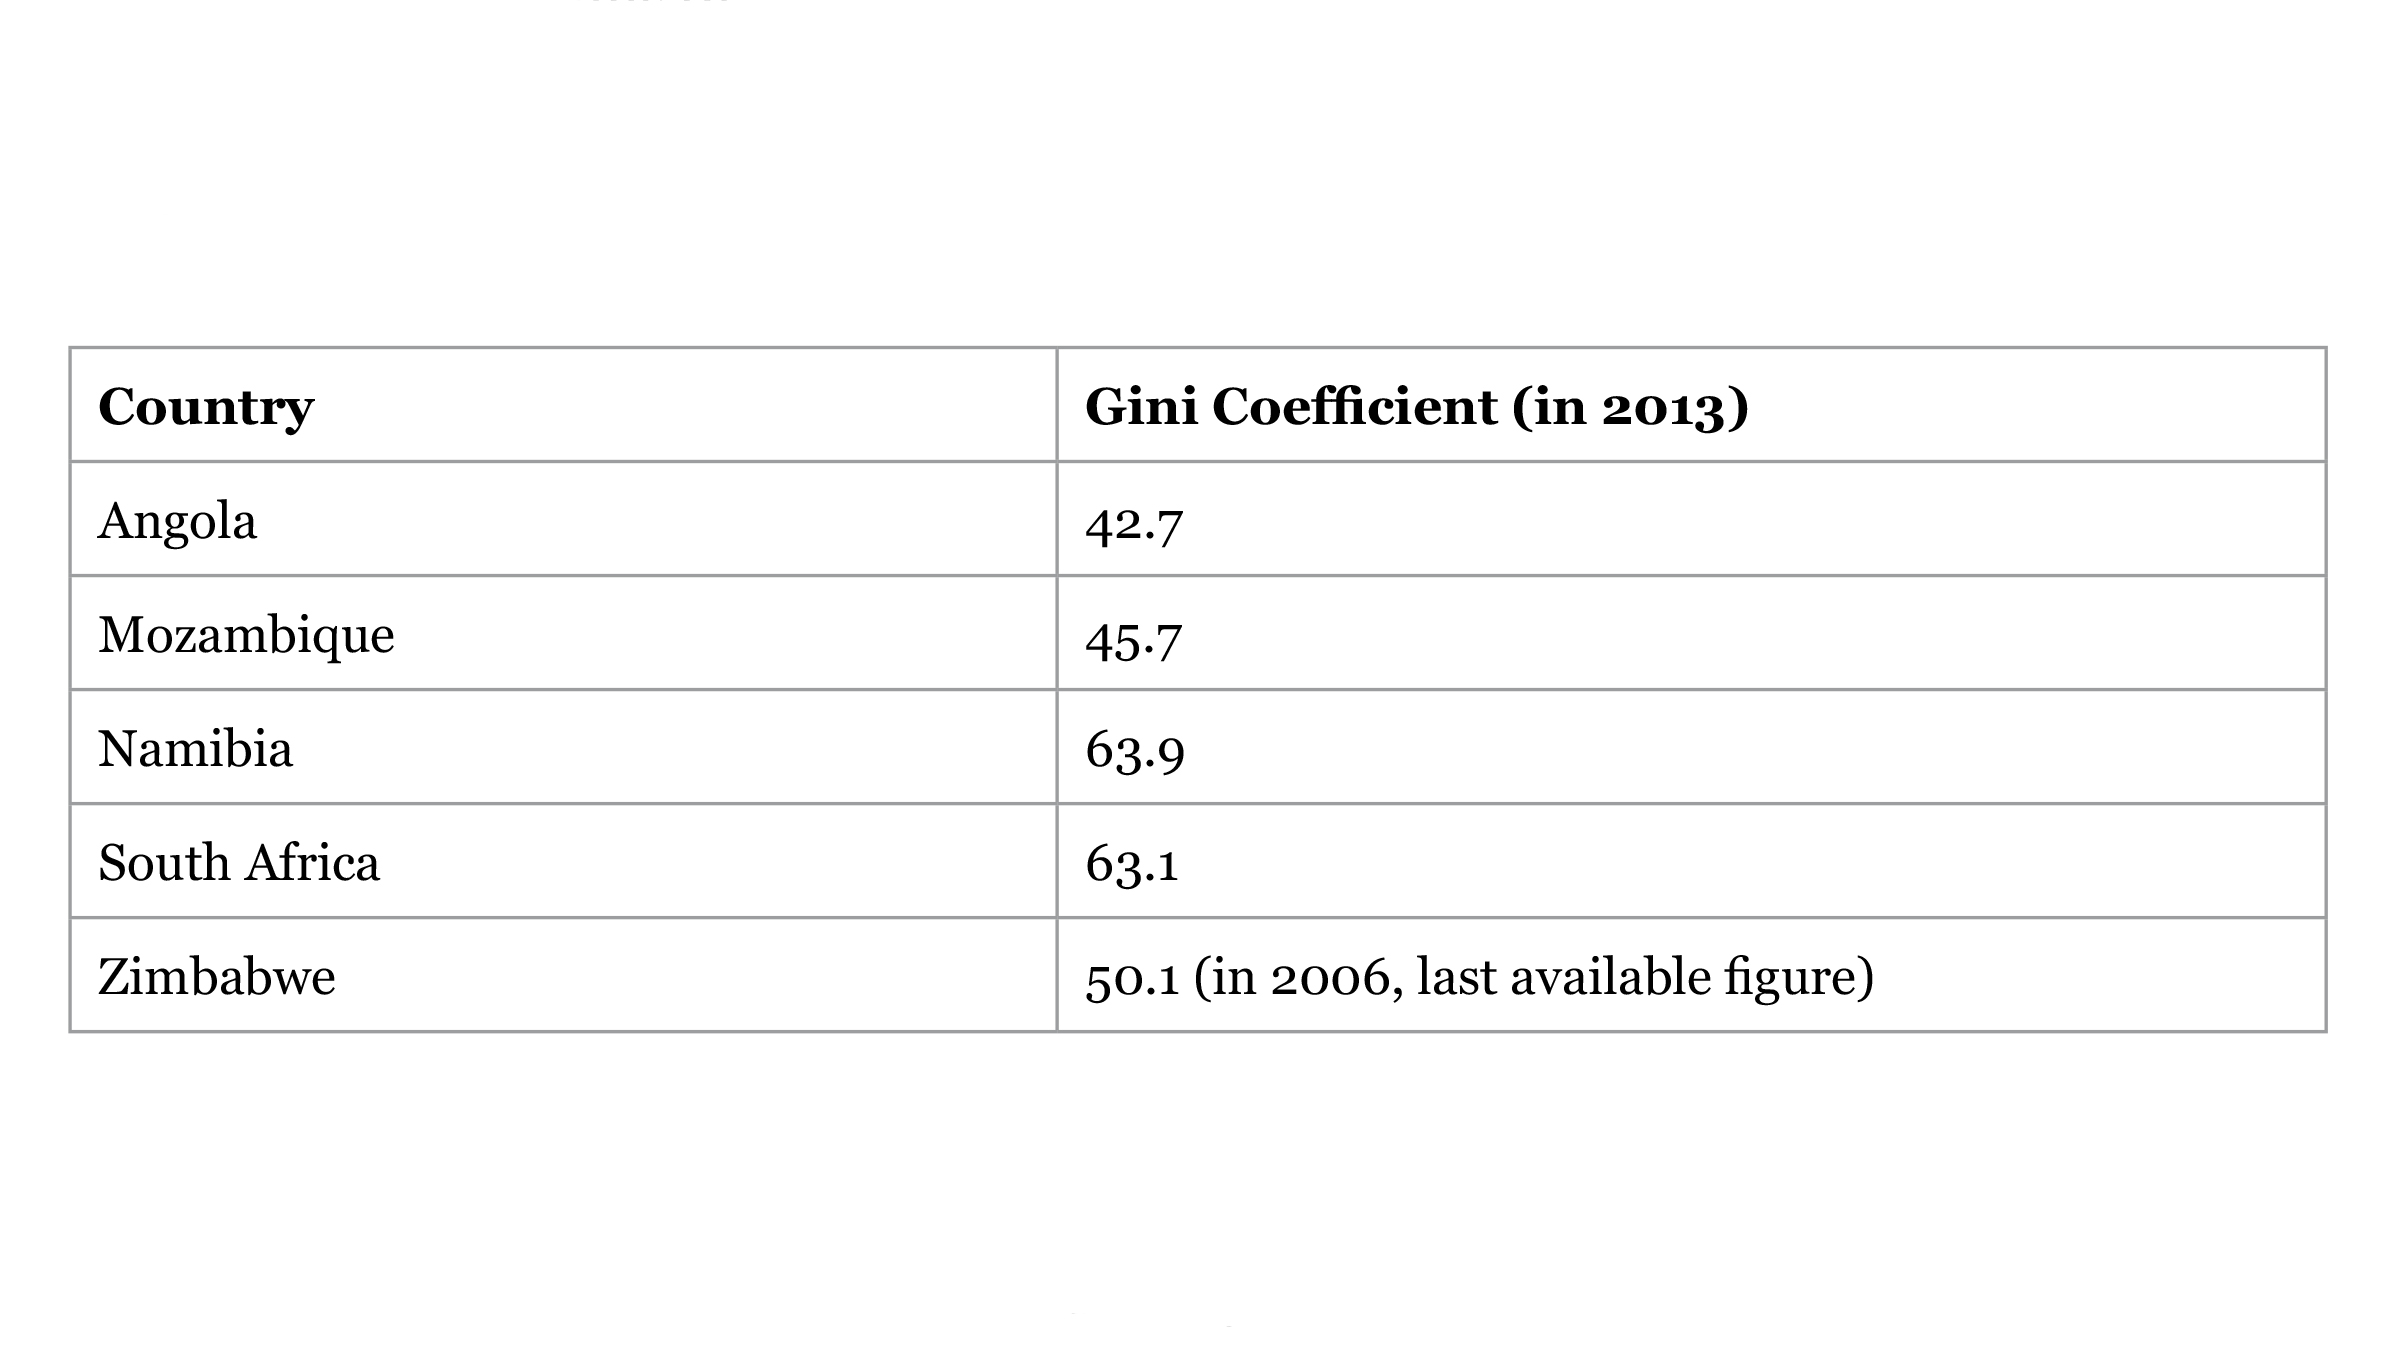 Table Gini Coefficient for Southern African Countries, 2013